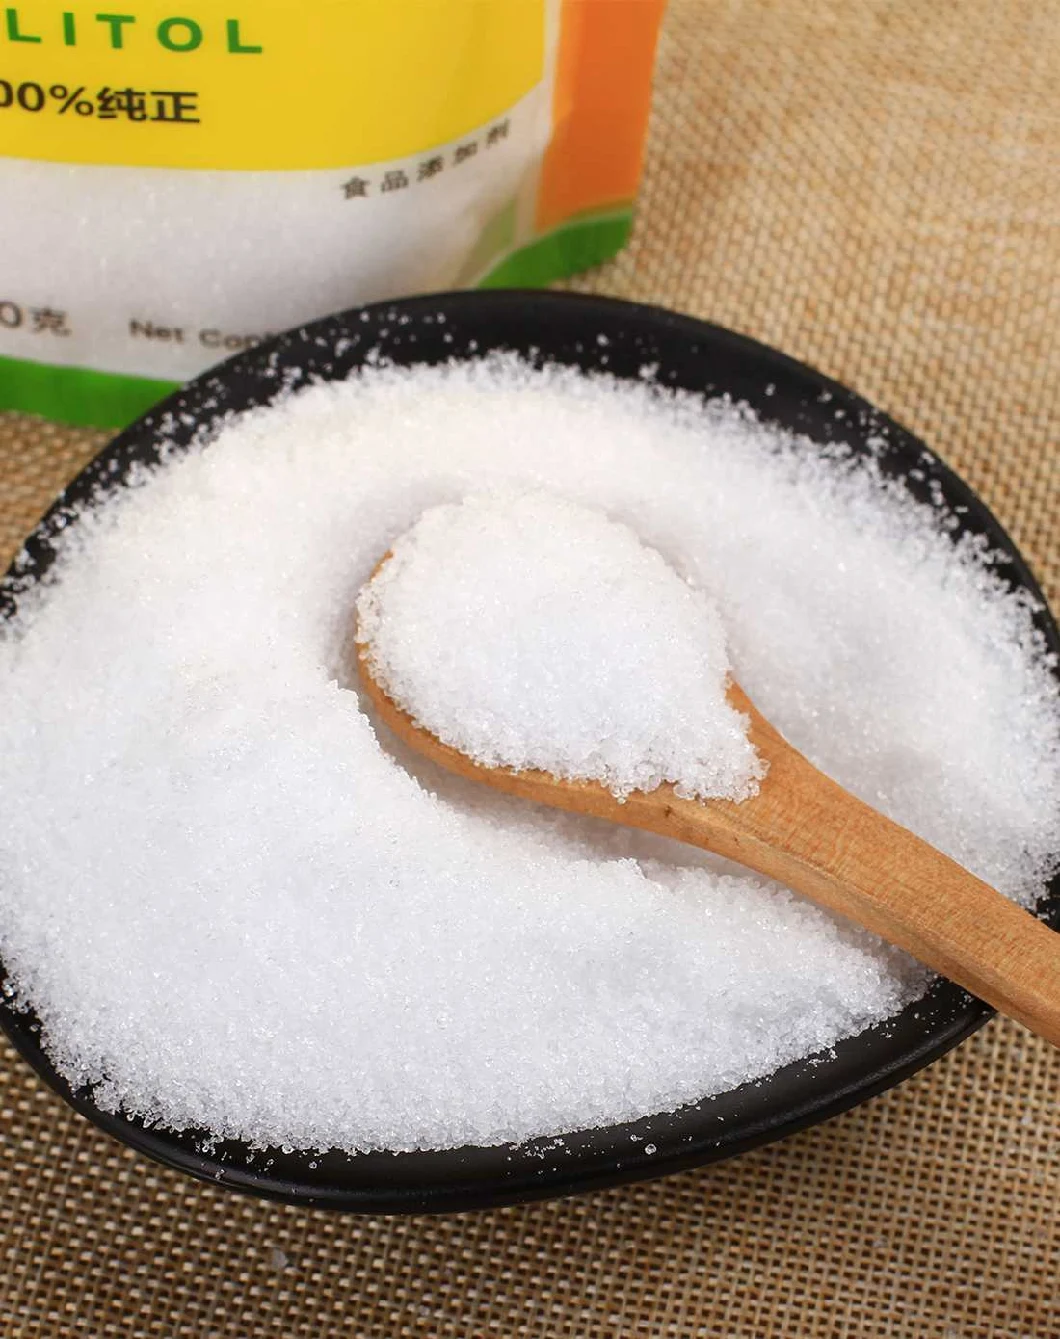 Xylitol Manufacturers Organic Xylitol Sweetener Powder Best Xylitol Crystals